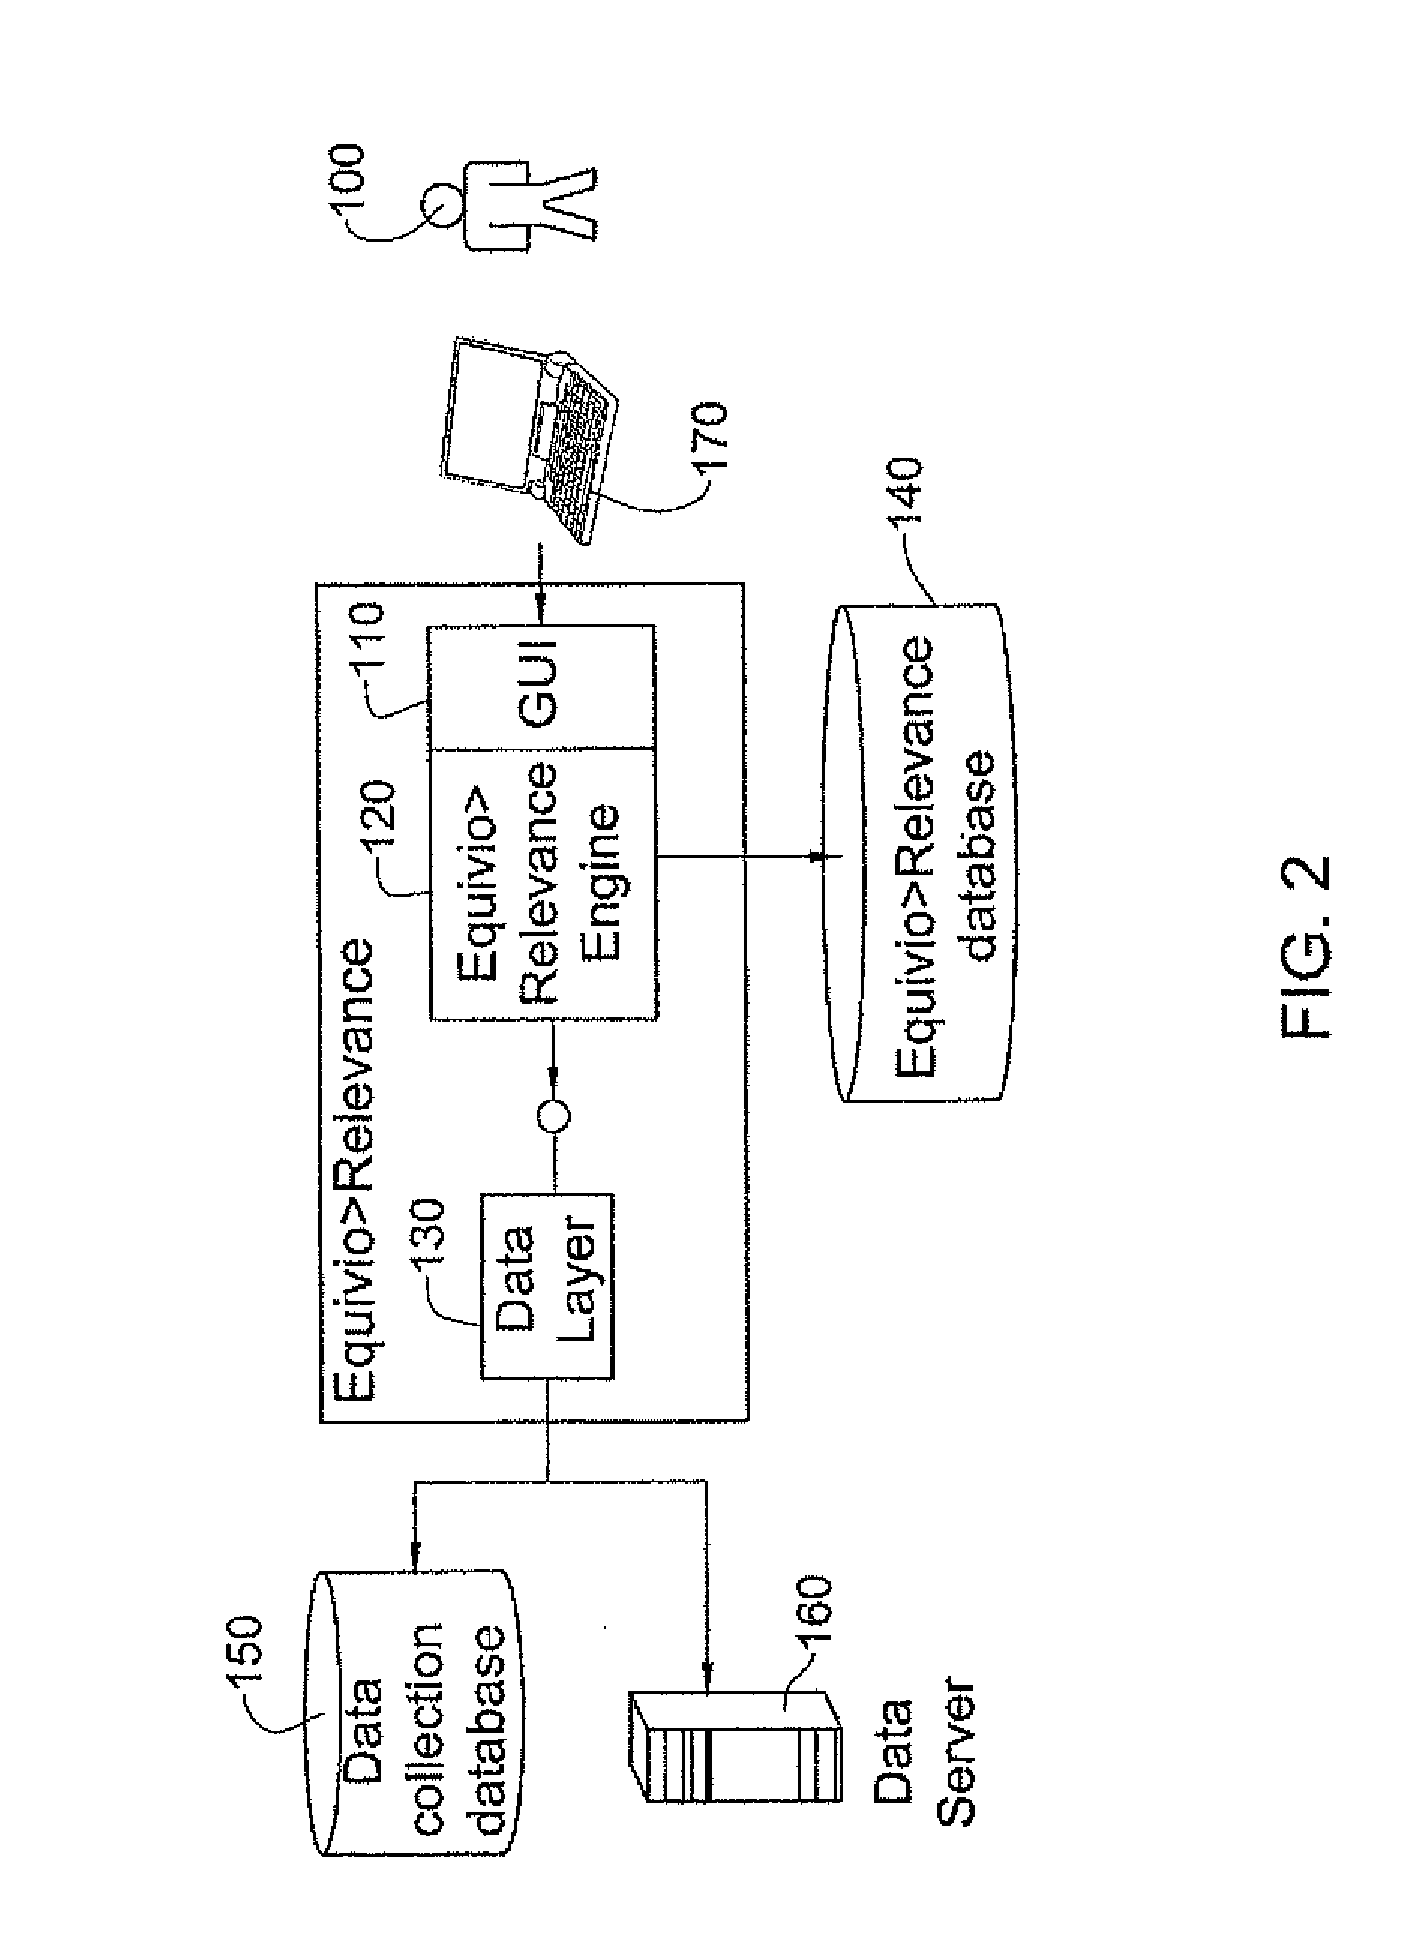 System for enhancing expert-based computerized analysis of a set of digital documents and methods useful in conjunction therewith